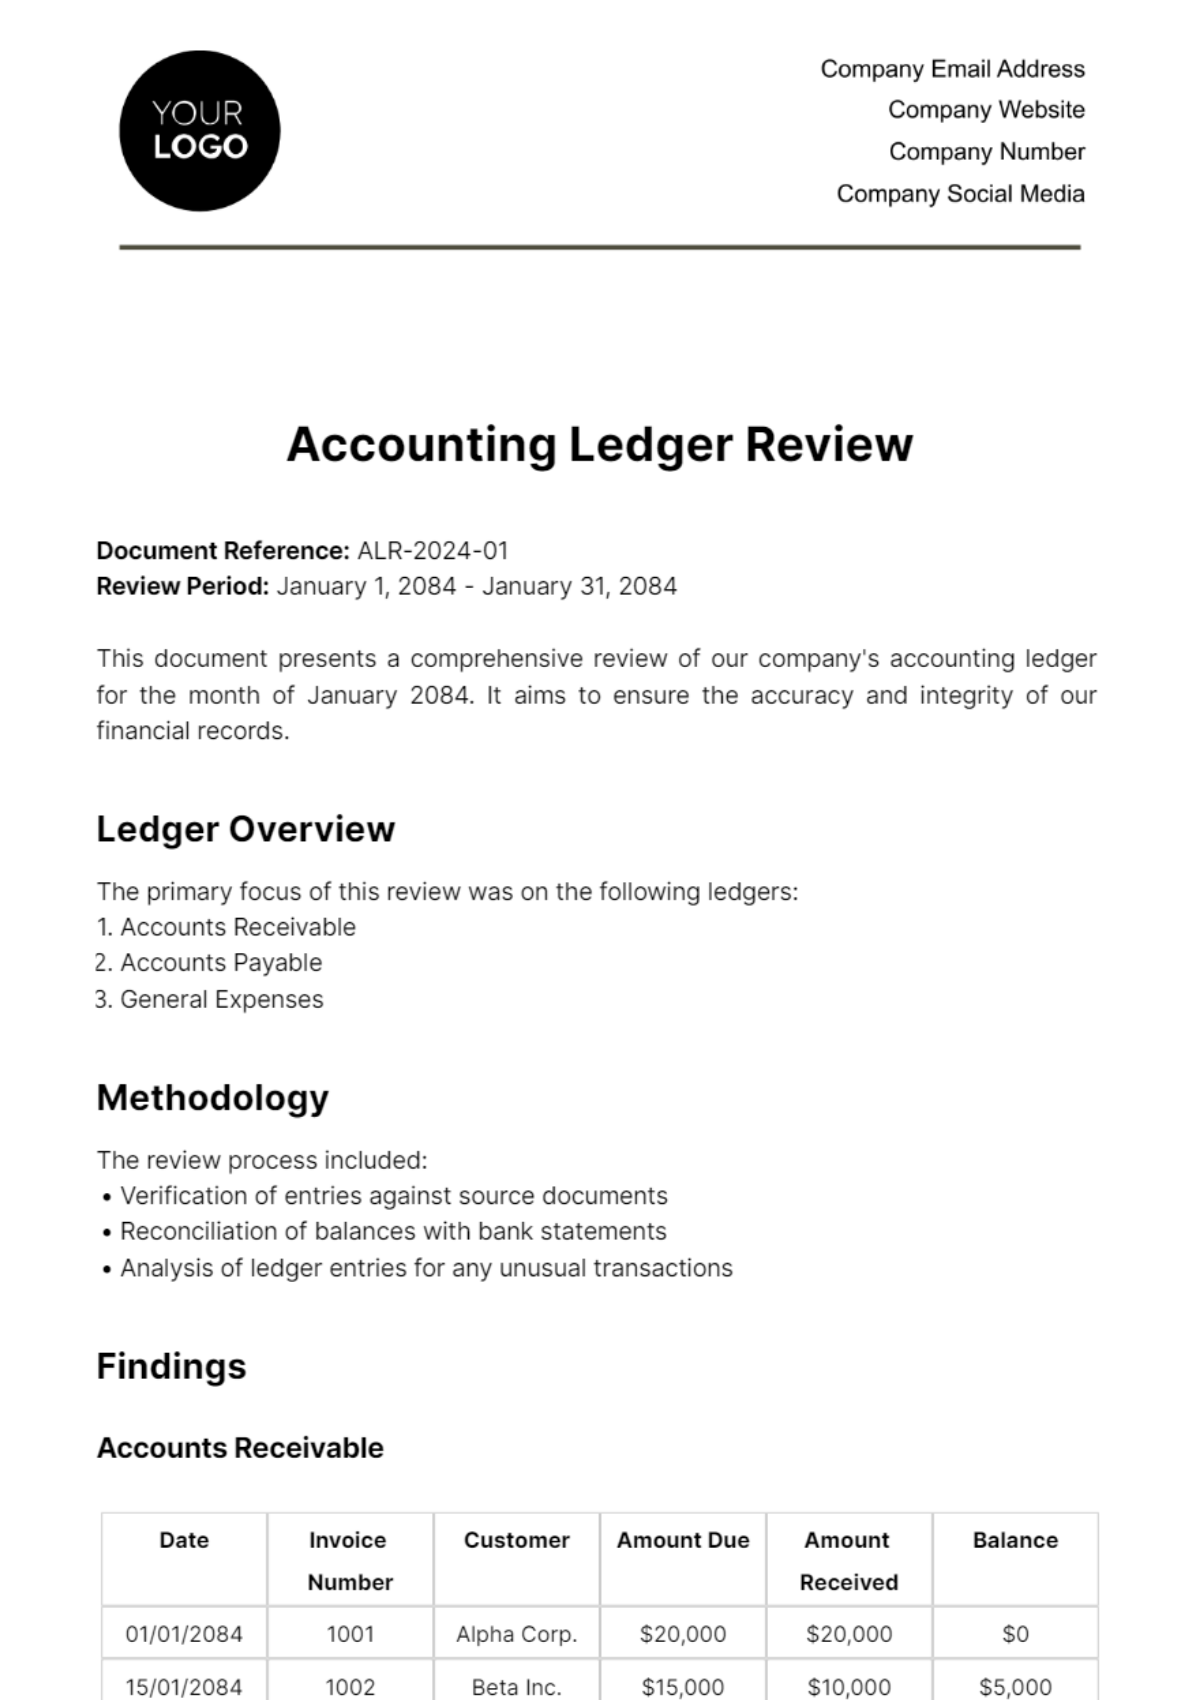 Accounting Ledger Review Template